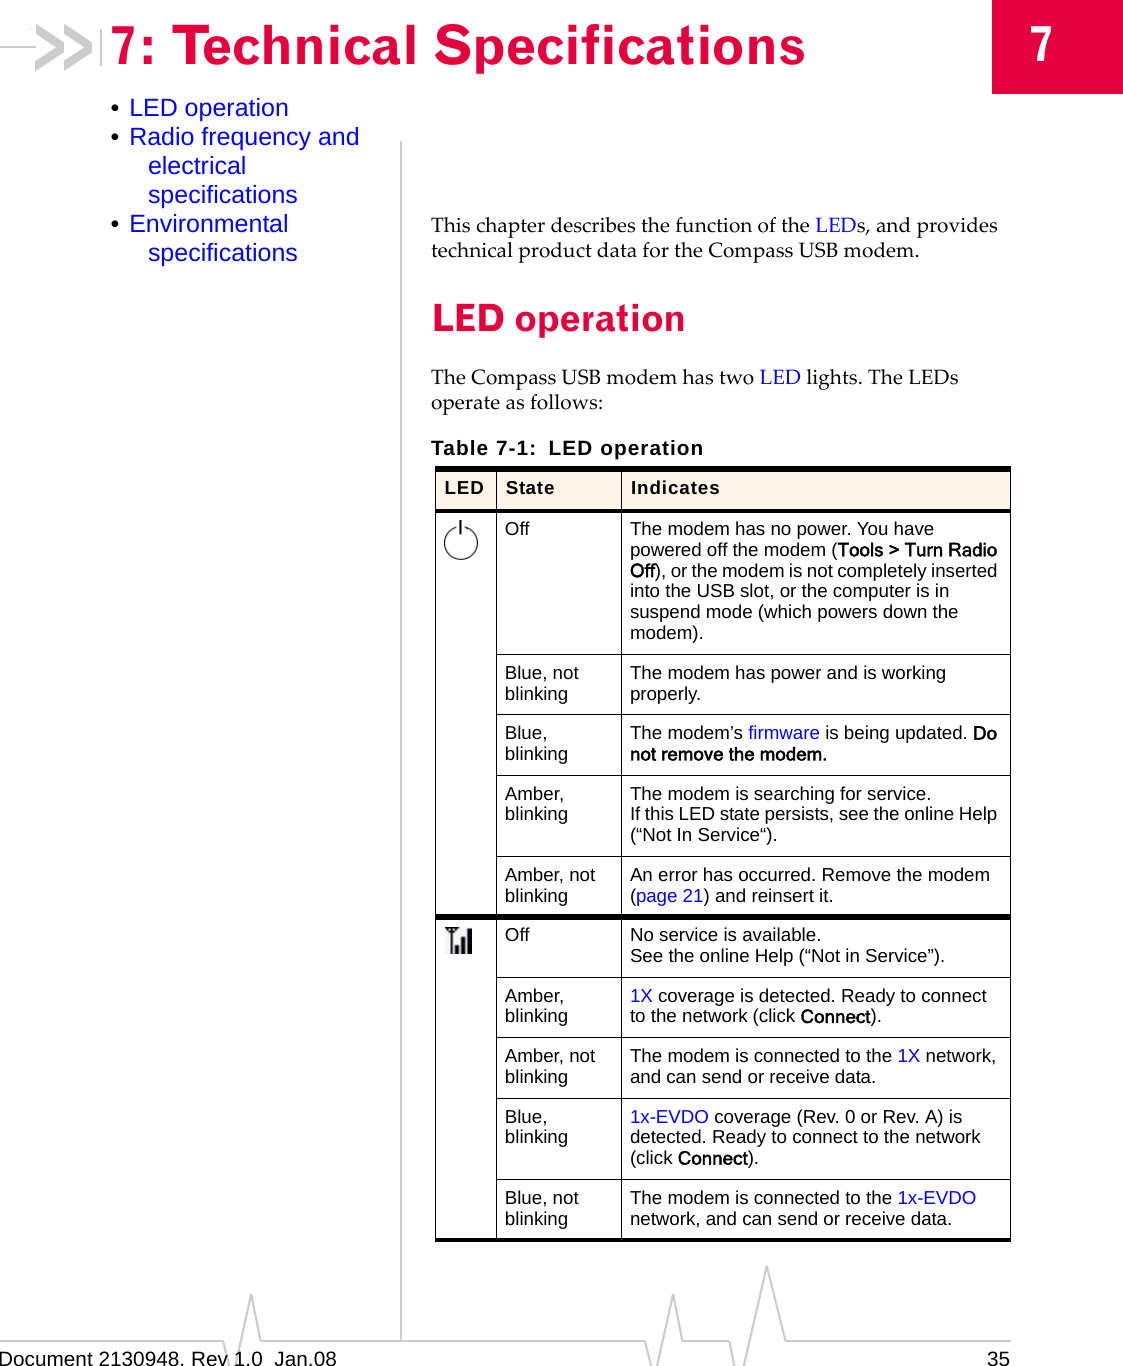 Document 2130948. Rev 1.0  Jan.08 3577: Technical Specifications•LED operation•Radio frequency and electrical specifications•Environmental specifications ThischapterdescribesthefunctionoftheLEDs,andprovidestechnicalproductdatafortheCompassUSBmodem.LED operationTheCompassUSBmodemhastwoLEDlights.TheLEDsoperateasfollows:Table 7-1: LED operationLED State IndicatesOff The modem has no power. You have powered off the modem (Tools &gt; Turn Radio Off), or the modem is not completely inserted into the USB slot, or the computer is in suspend mode (which powers down the modem).Blue, not blinking The modem has power and is working properly.Blue, blinking The modem’s firmware is being updated. Do not remove the modem.Amber, blinking The modem is searching for service.If this LED state persists, see the online Help (“Not In Service“).Amber, not blinking An error has occurred. Remove the modem (page 21) and reinsert it.Off No service is available.See the online Help (“Not in Service”).Amber, blinking 1X coverage is detected. Ready to connect to the network (click Connect).Amber, not blinking The modem is connected to the 1X network, and can send or receive data.Blue, blinking 1x-EVDO coverage (Rev. 0 or Rev. A) is detected. Ready to connect to the network (click Connect).Blue, not blinking The modem is connected to the 1x-EVDO network, and can send or receive data.